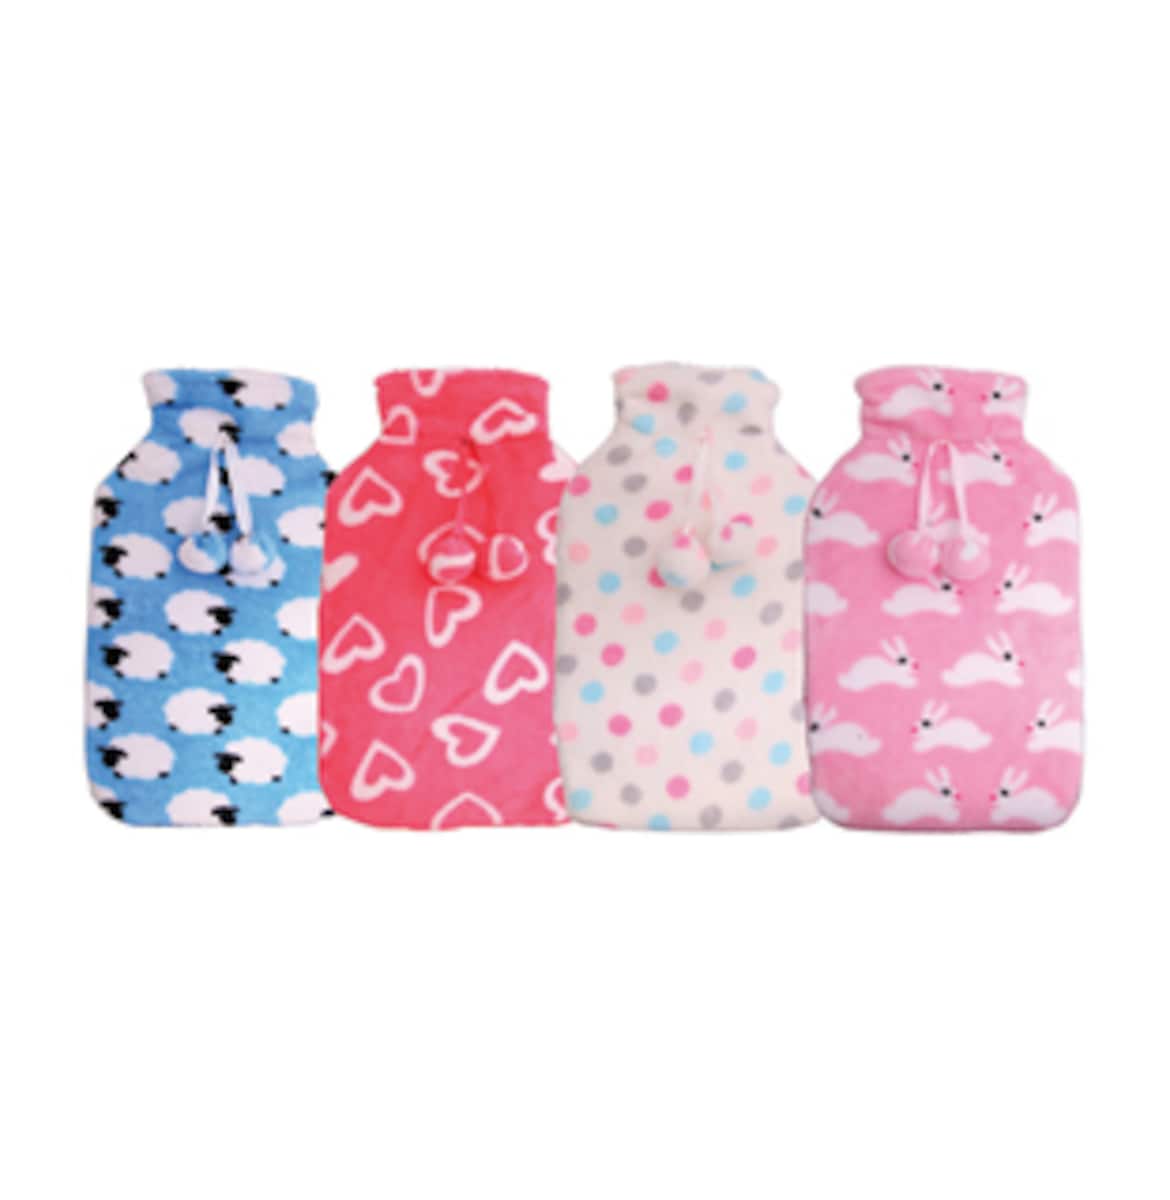 McGloins Hot Water Bottle with Coral Fleece Cover (Assorted Designs Selected at Random)